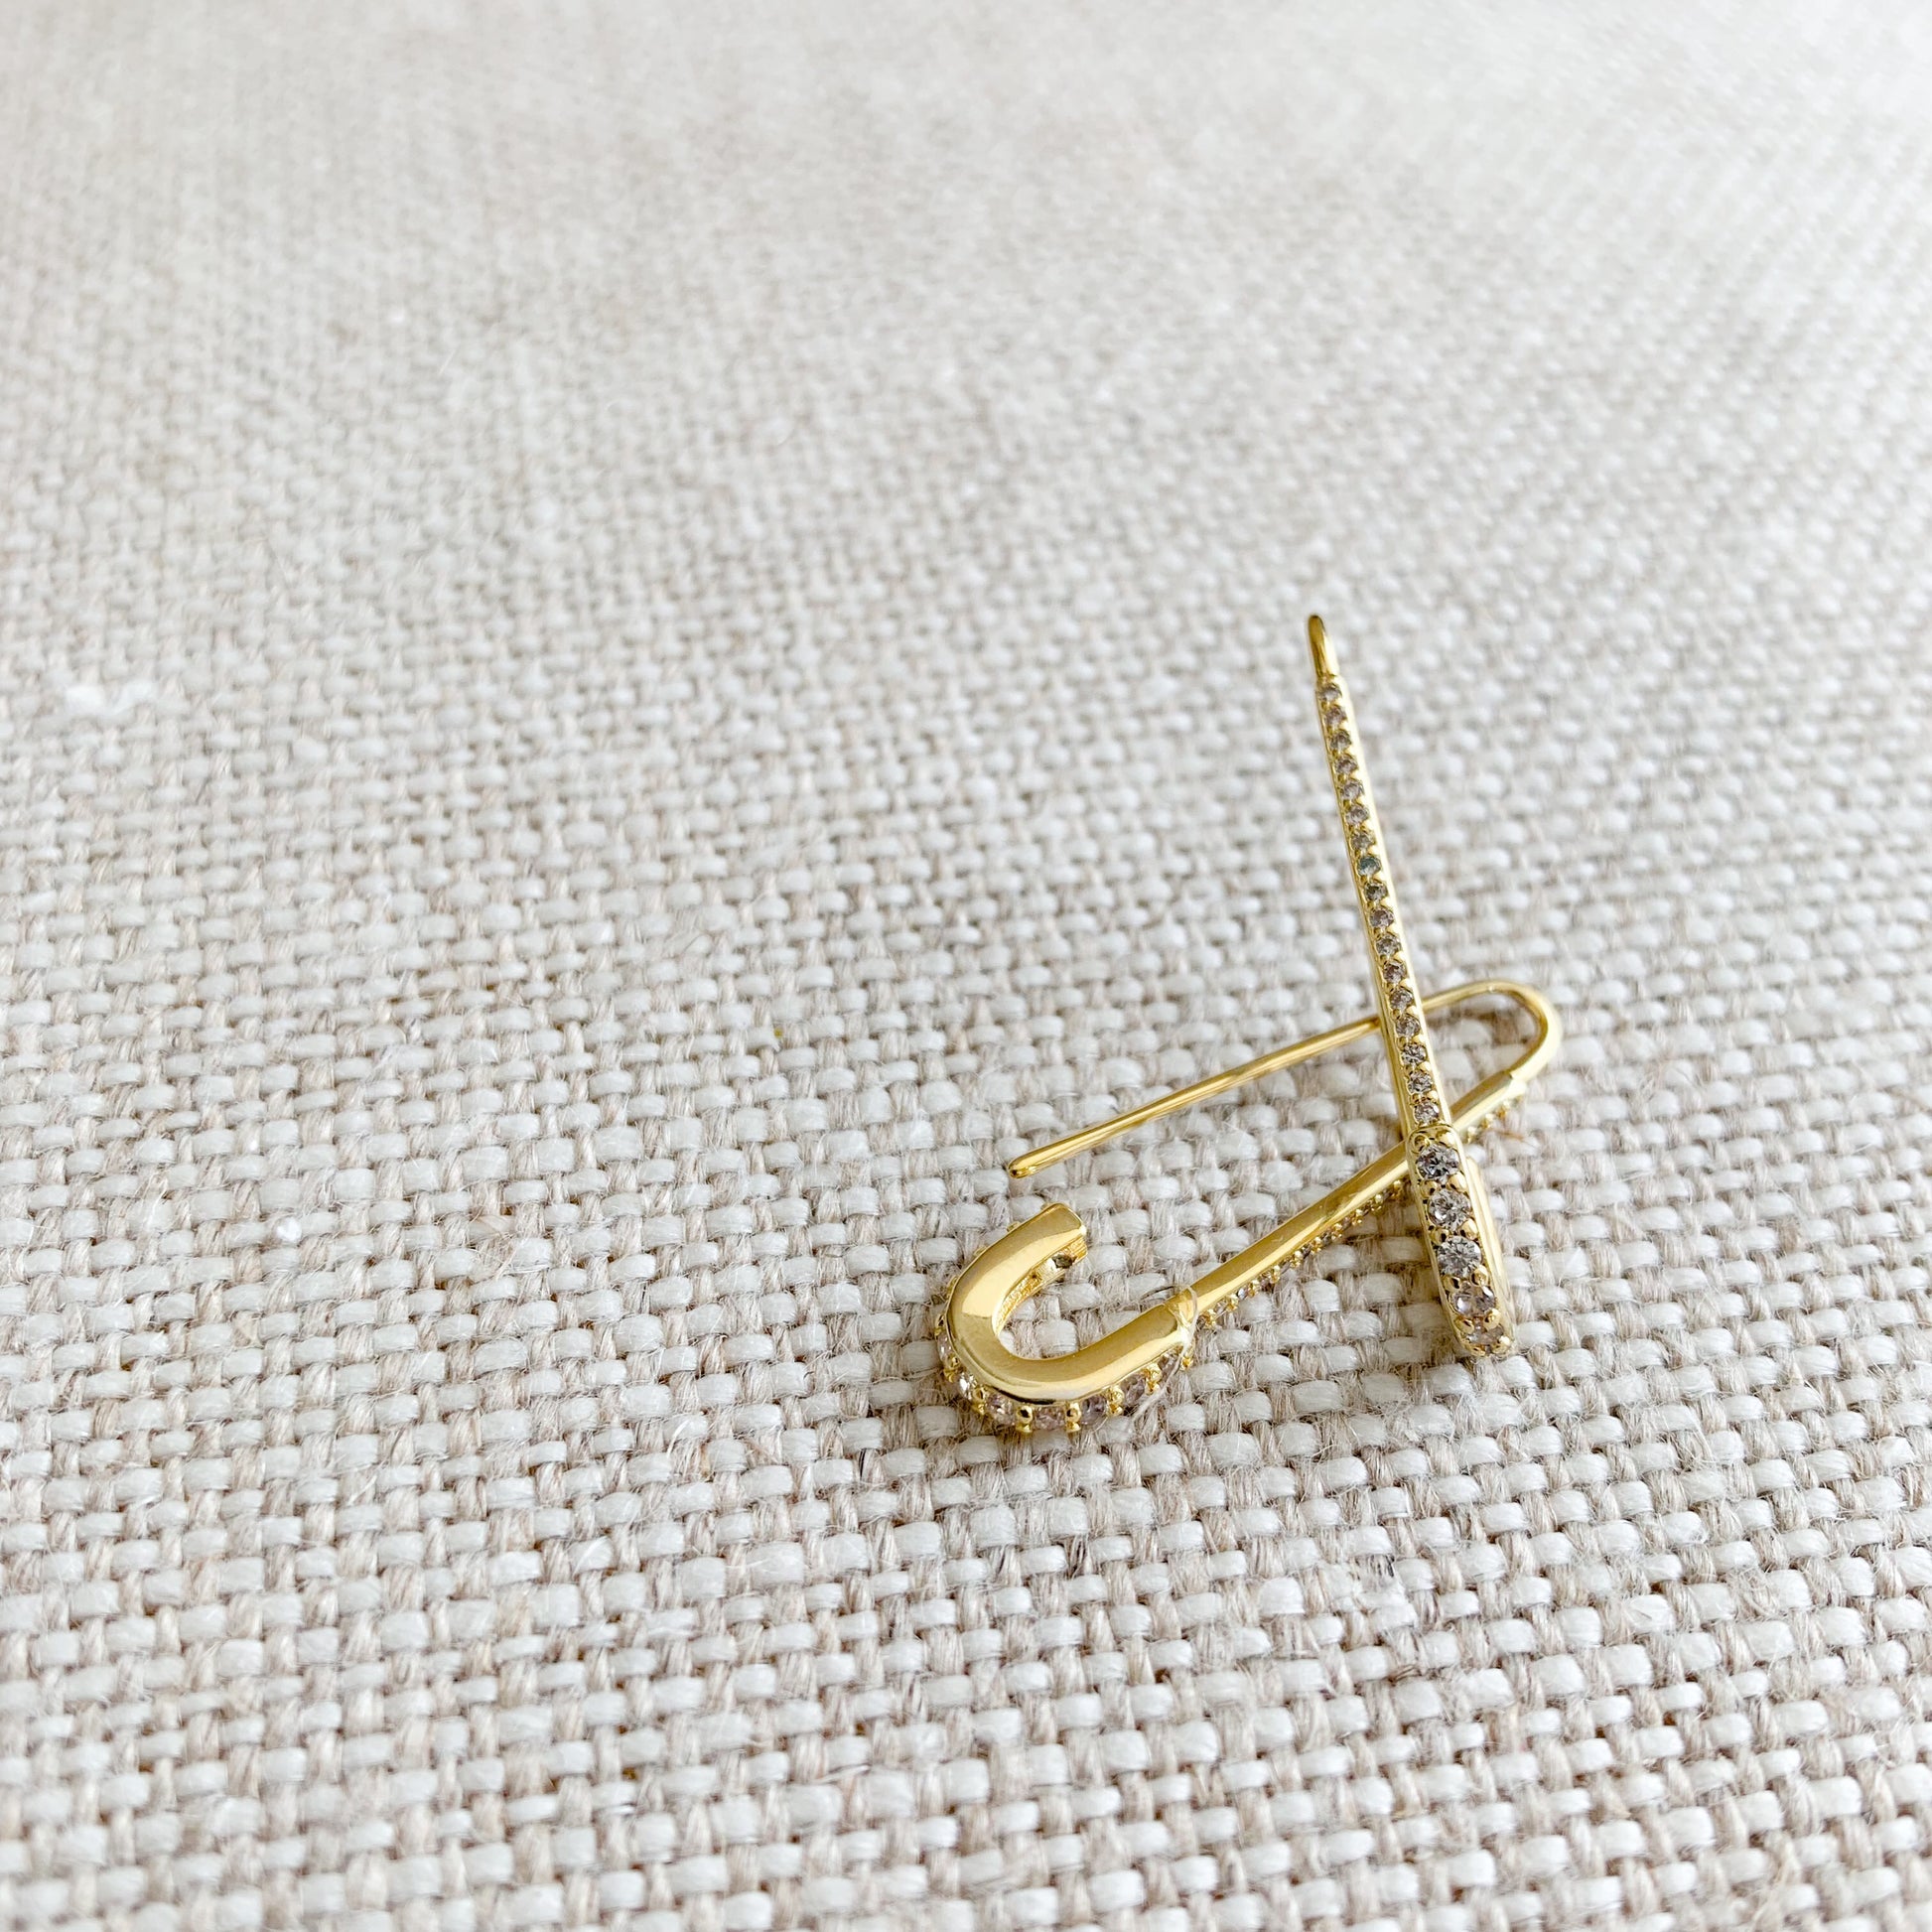 Safety Pin Earrings - BelleStyle